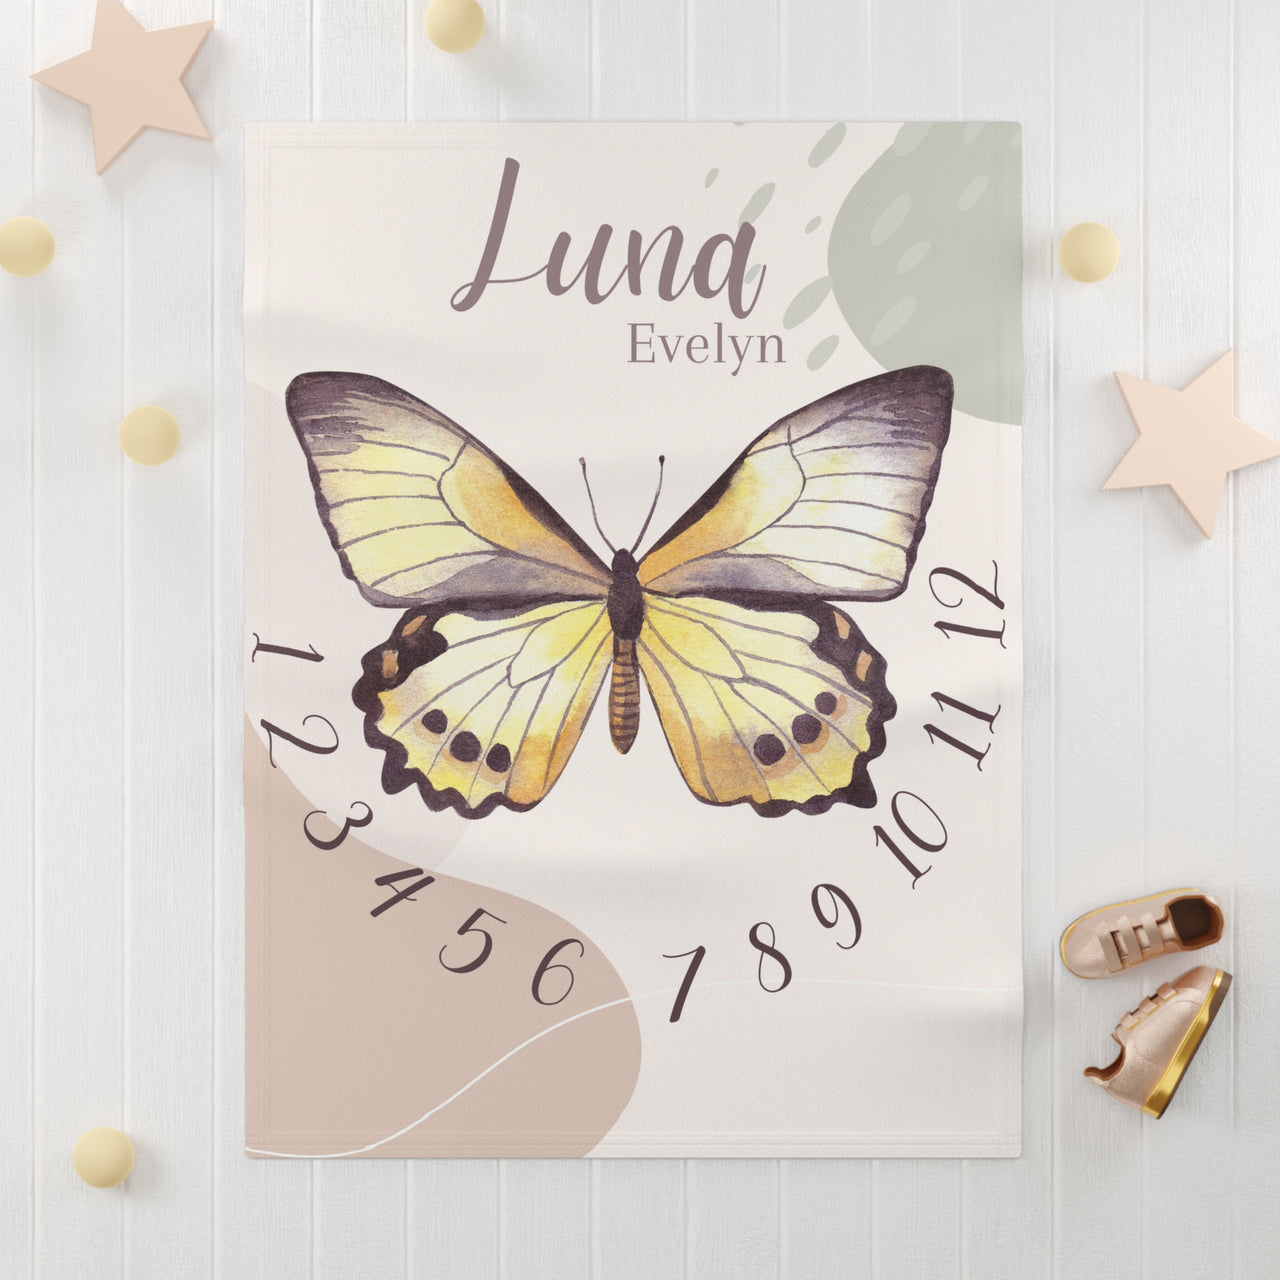 Watercolor Butterfly Themed Soft Fleece Milestone Blanket, Boys Monthly Growth Tracker, Personalized Baby Blanket, Baby Shower Gift